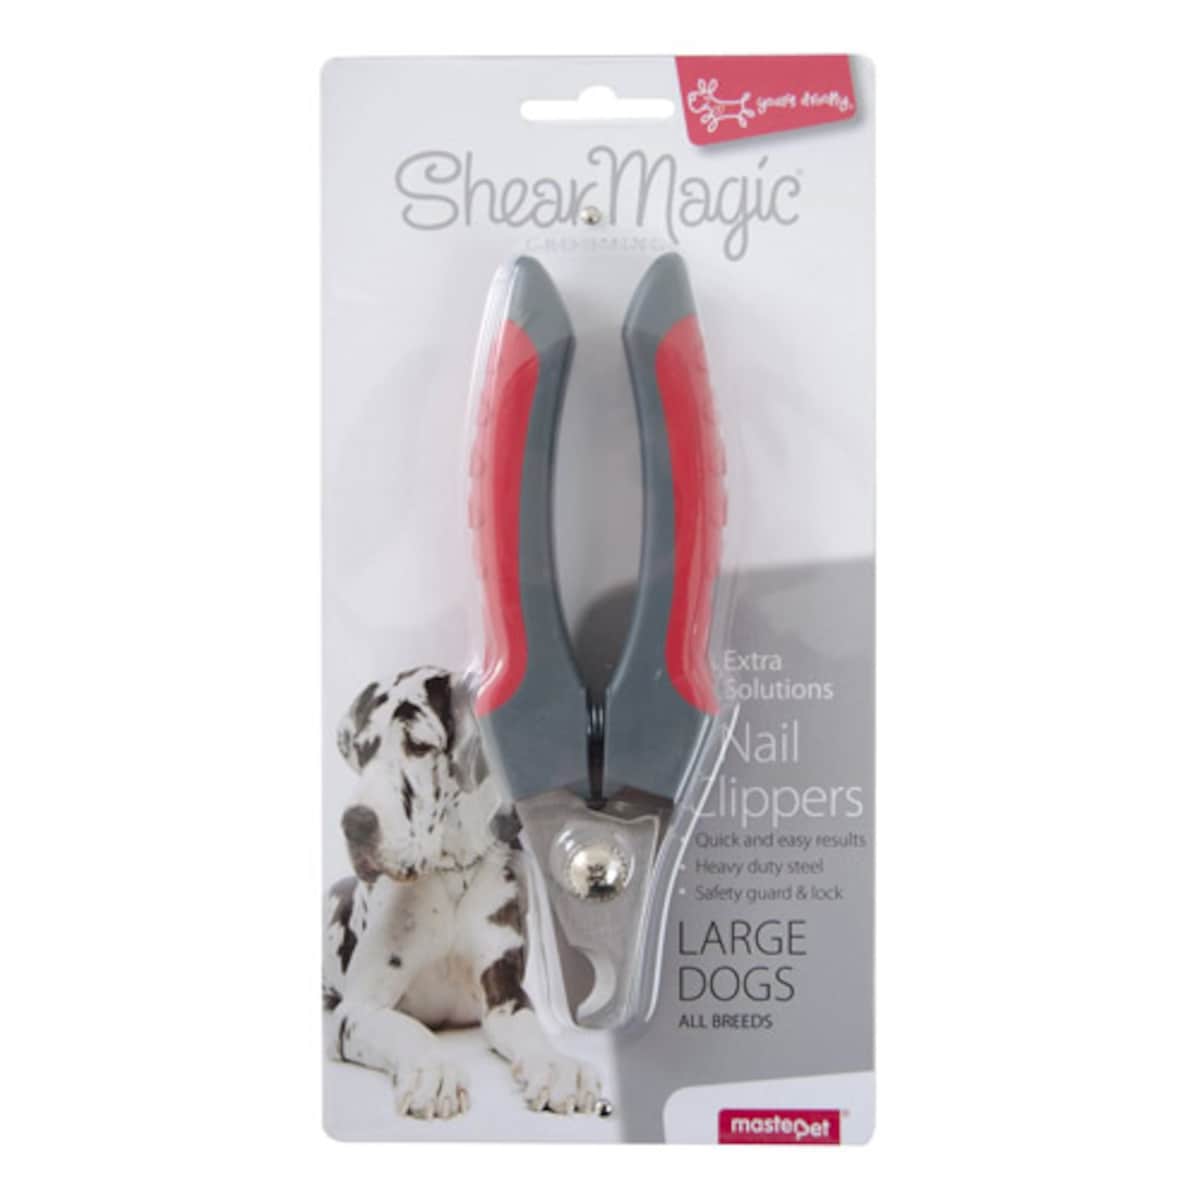 Shear Magic Nail Clippers Large Dogs